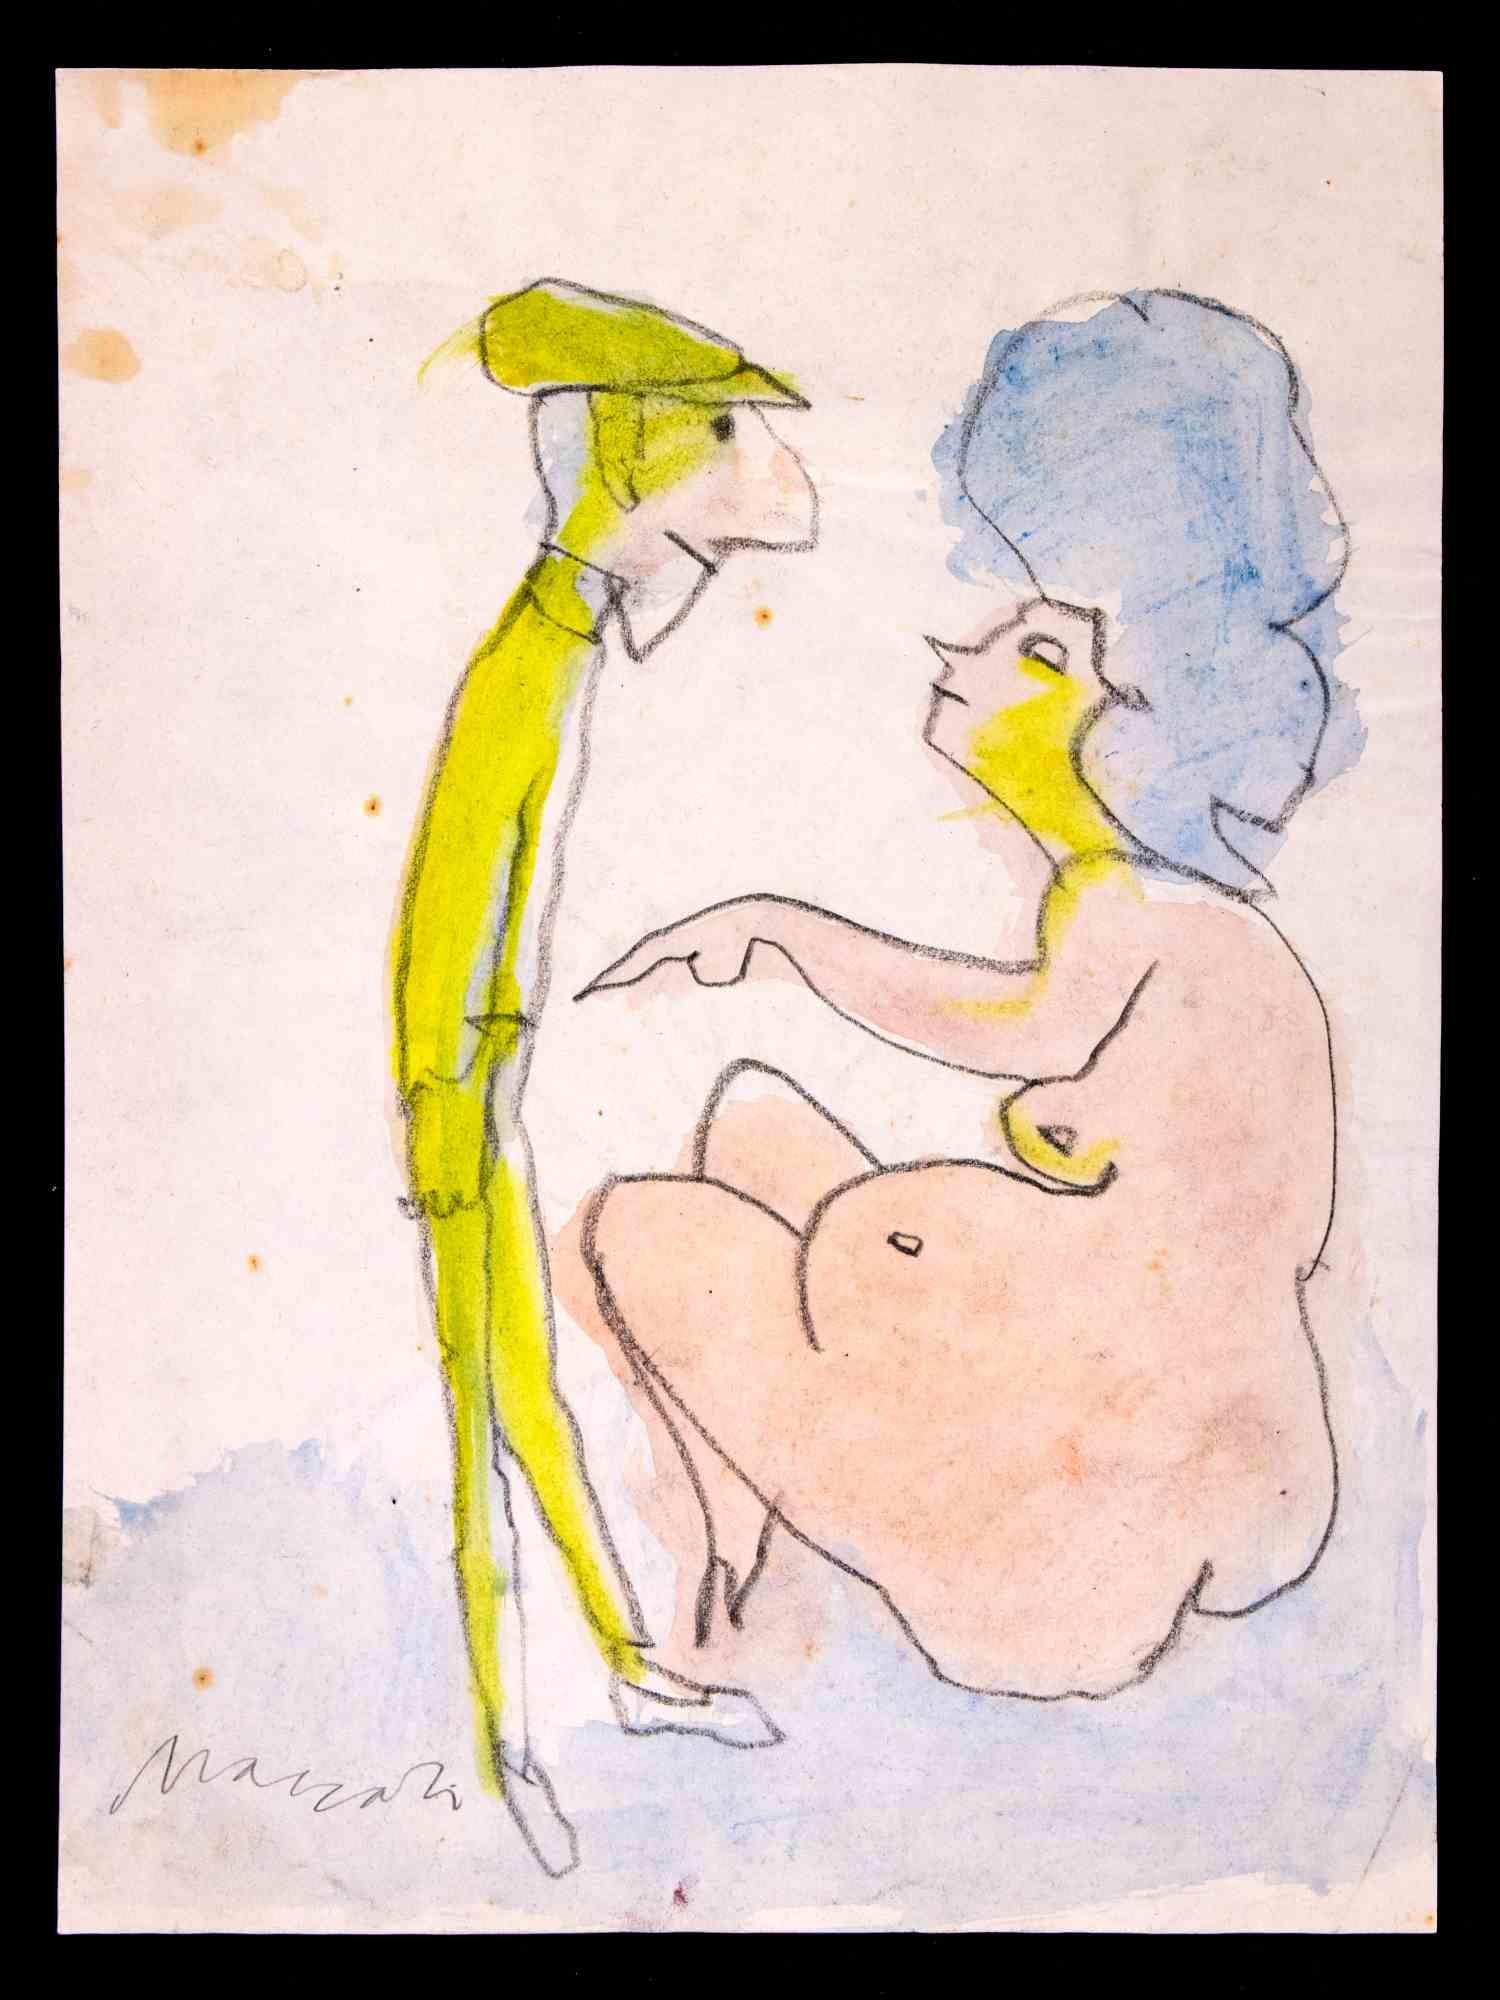 The Couple - Drawing by Mino Maccari - 1980